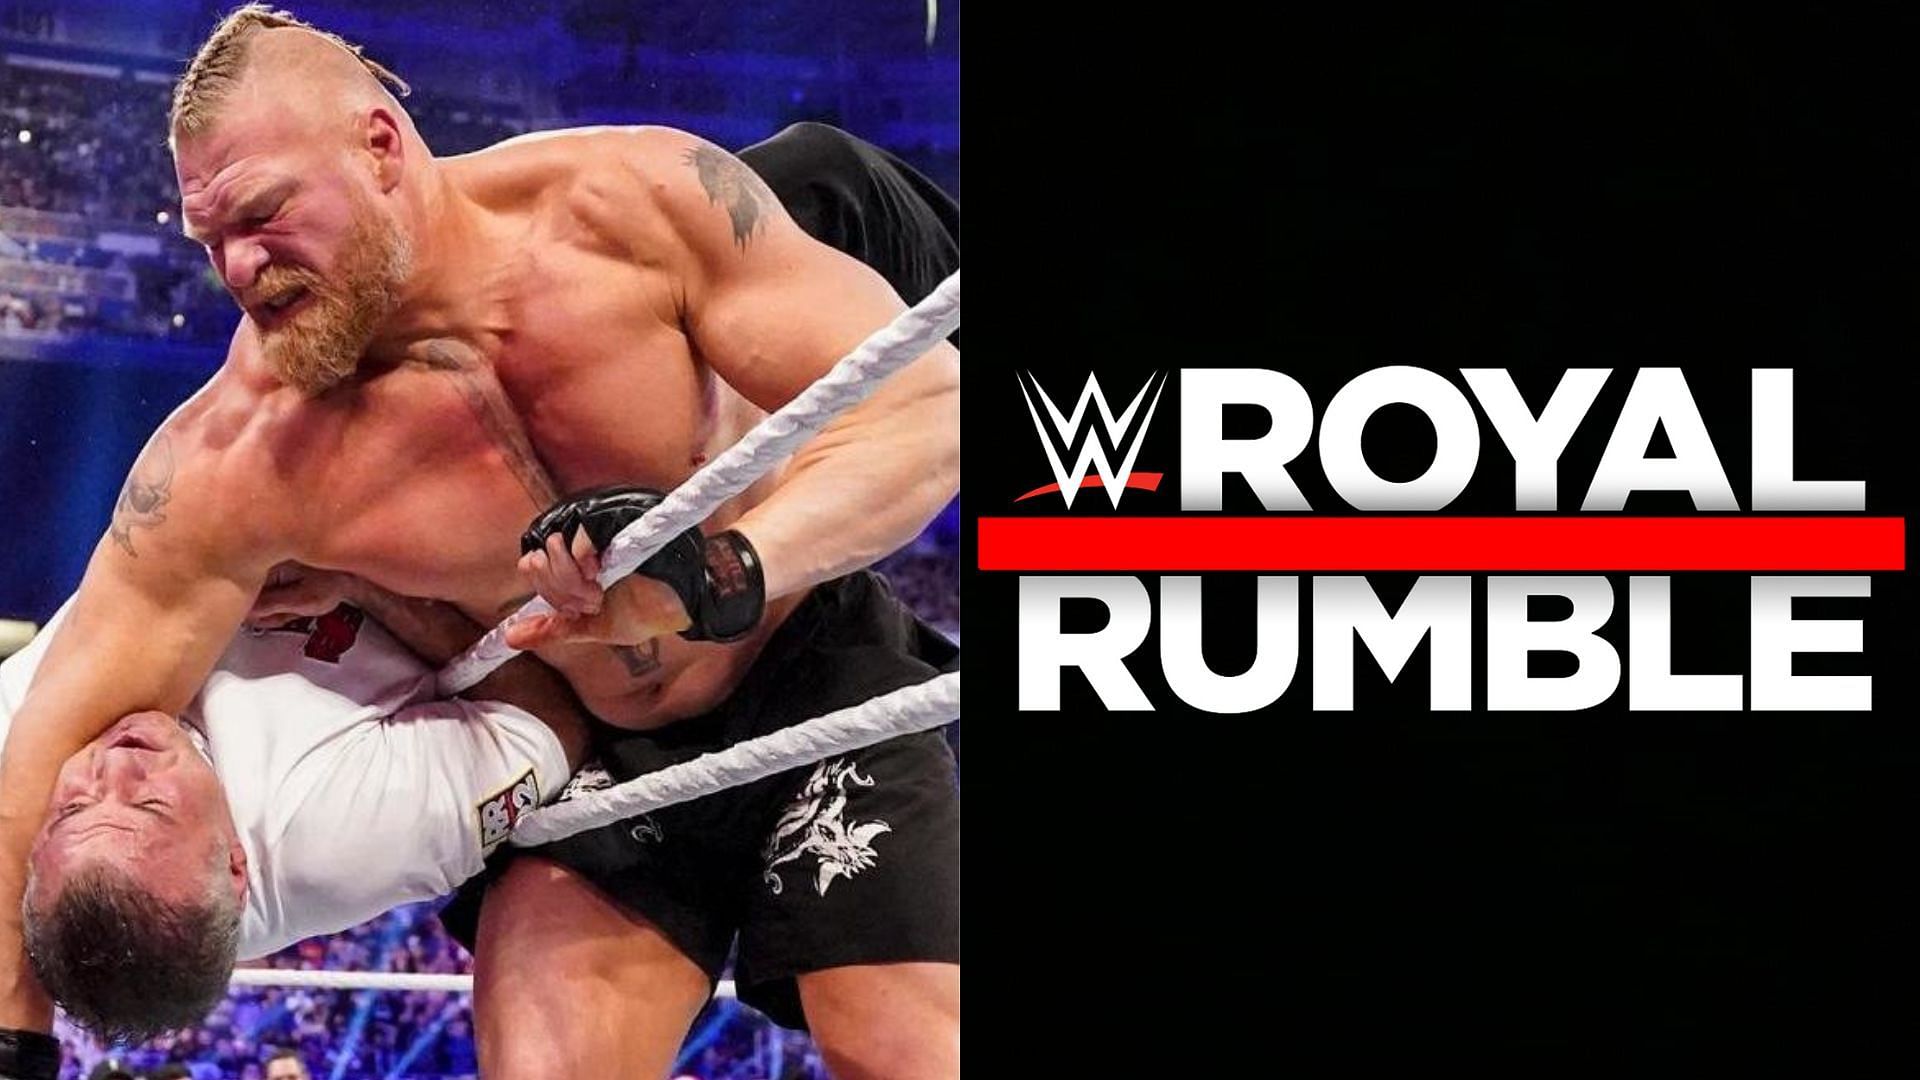 WWE Royal Rumble 2023: Which impressive records could be broken or made at the upcoming event?